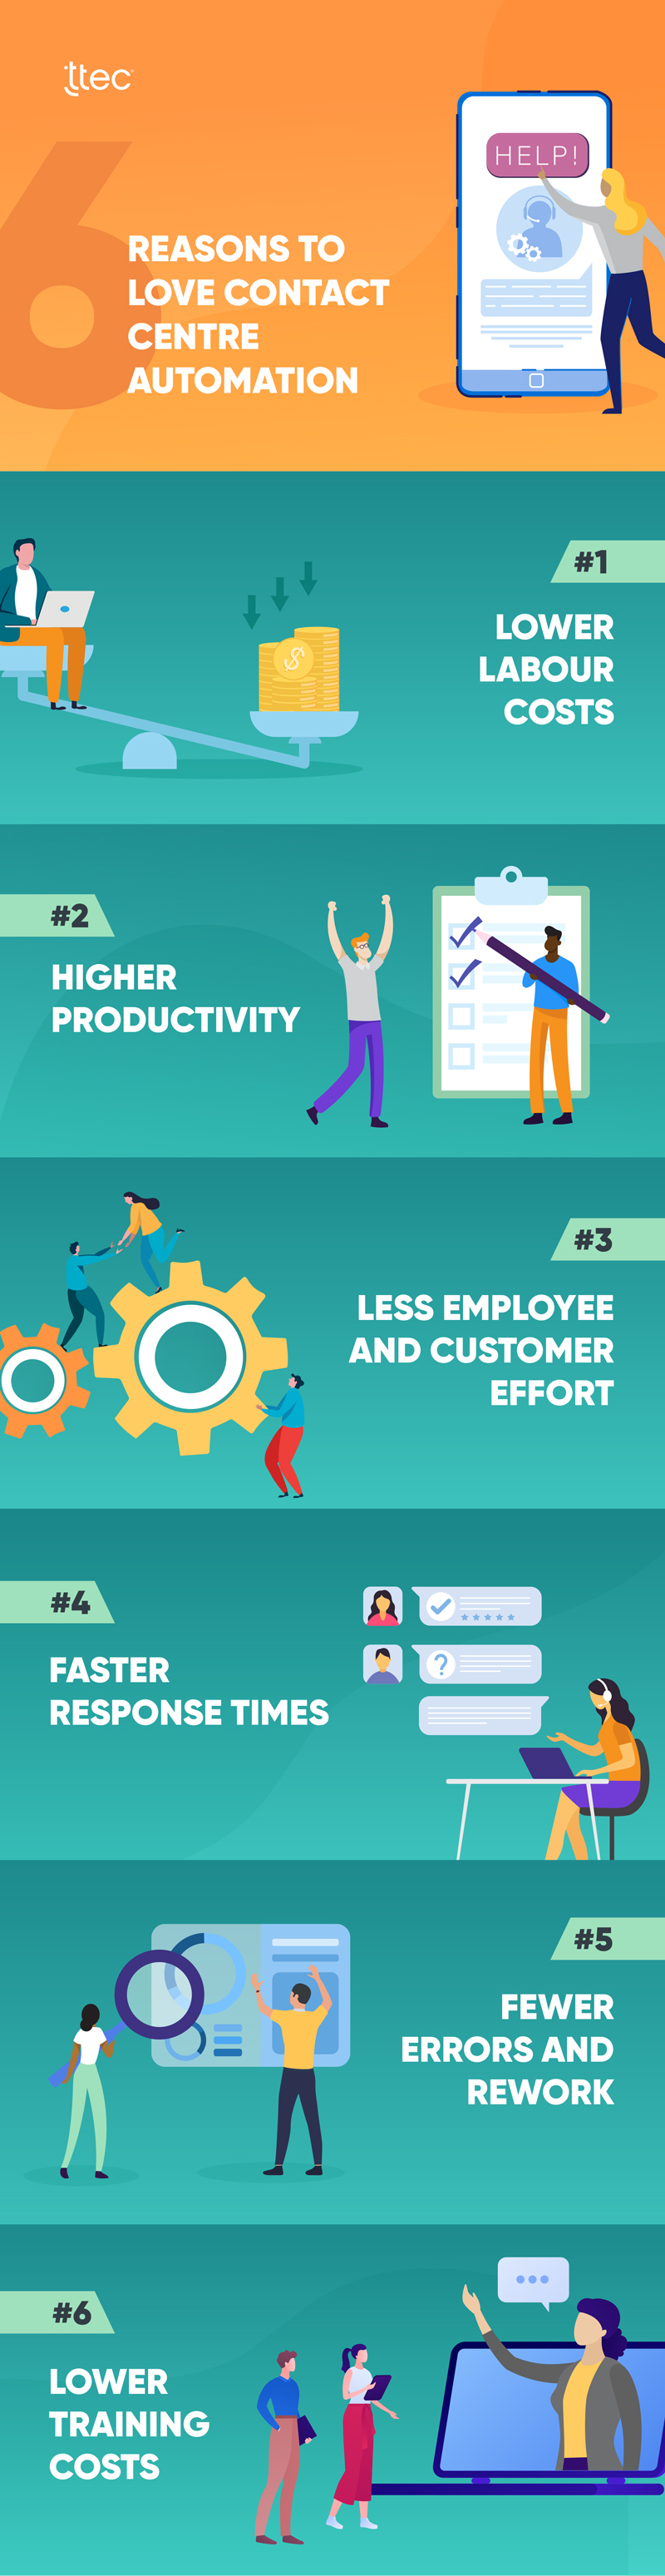 infographic benefits of contact centre automation